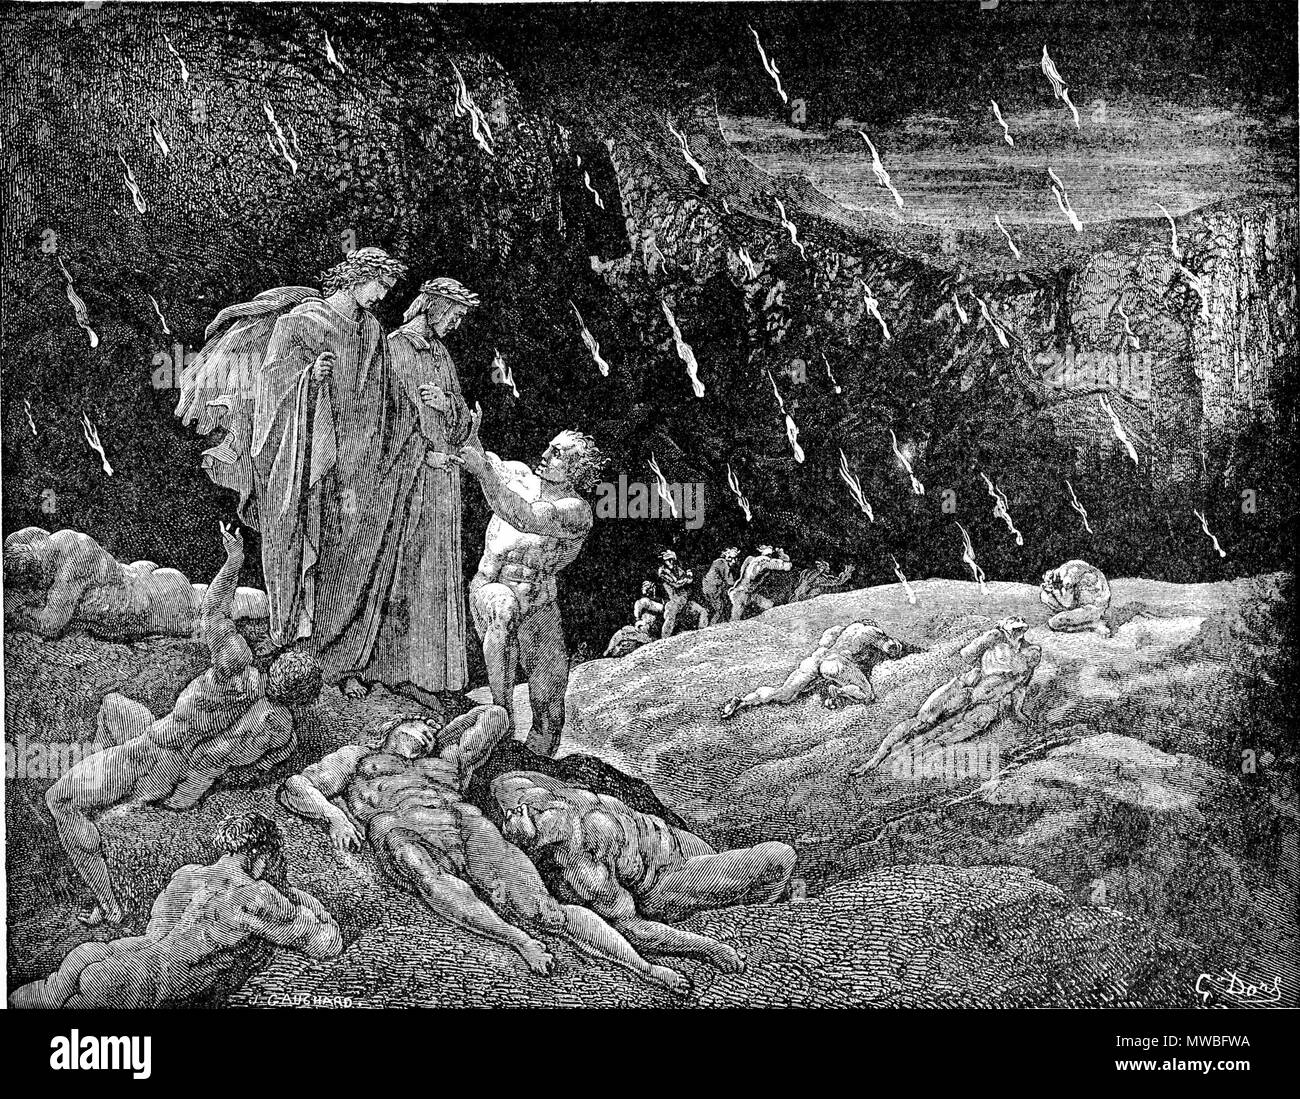 . High resolution scan of engraving by Gustave Doré illustrating Canto XV of Divine Comedy, Inferno, by Dante Alighieri. Caption: Brunetto Latini accosts Dante . 30 January 2008. scanned, post-processed, and uploaded by Karl Hahn 174 DVinfernoBrunettoLatiniAccostsDante m Stock Photo